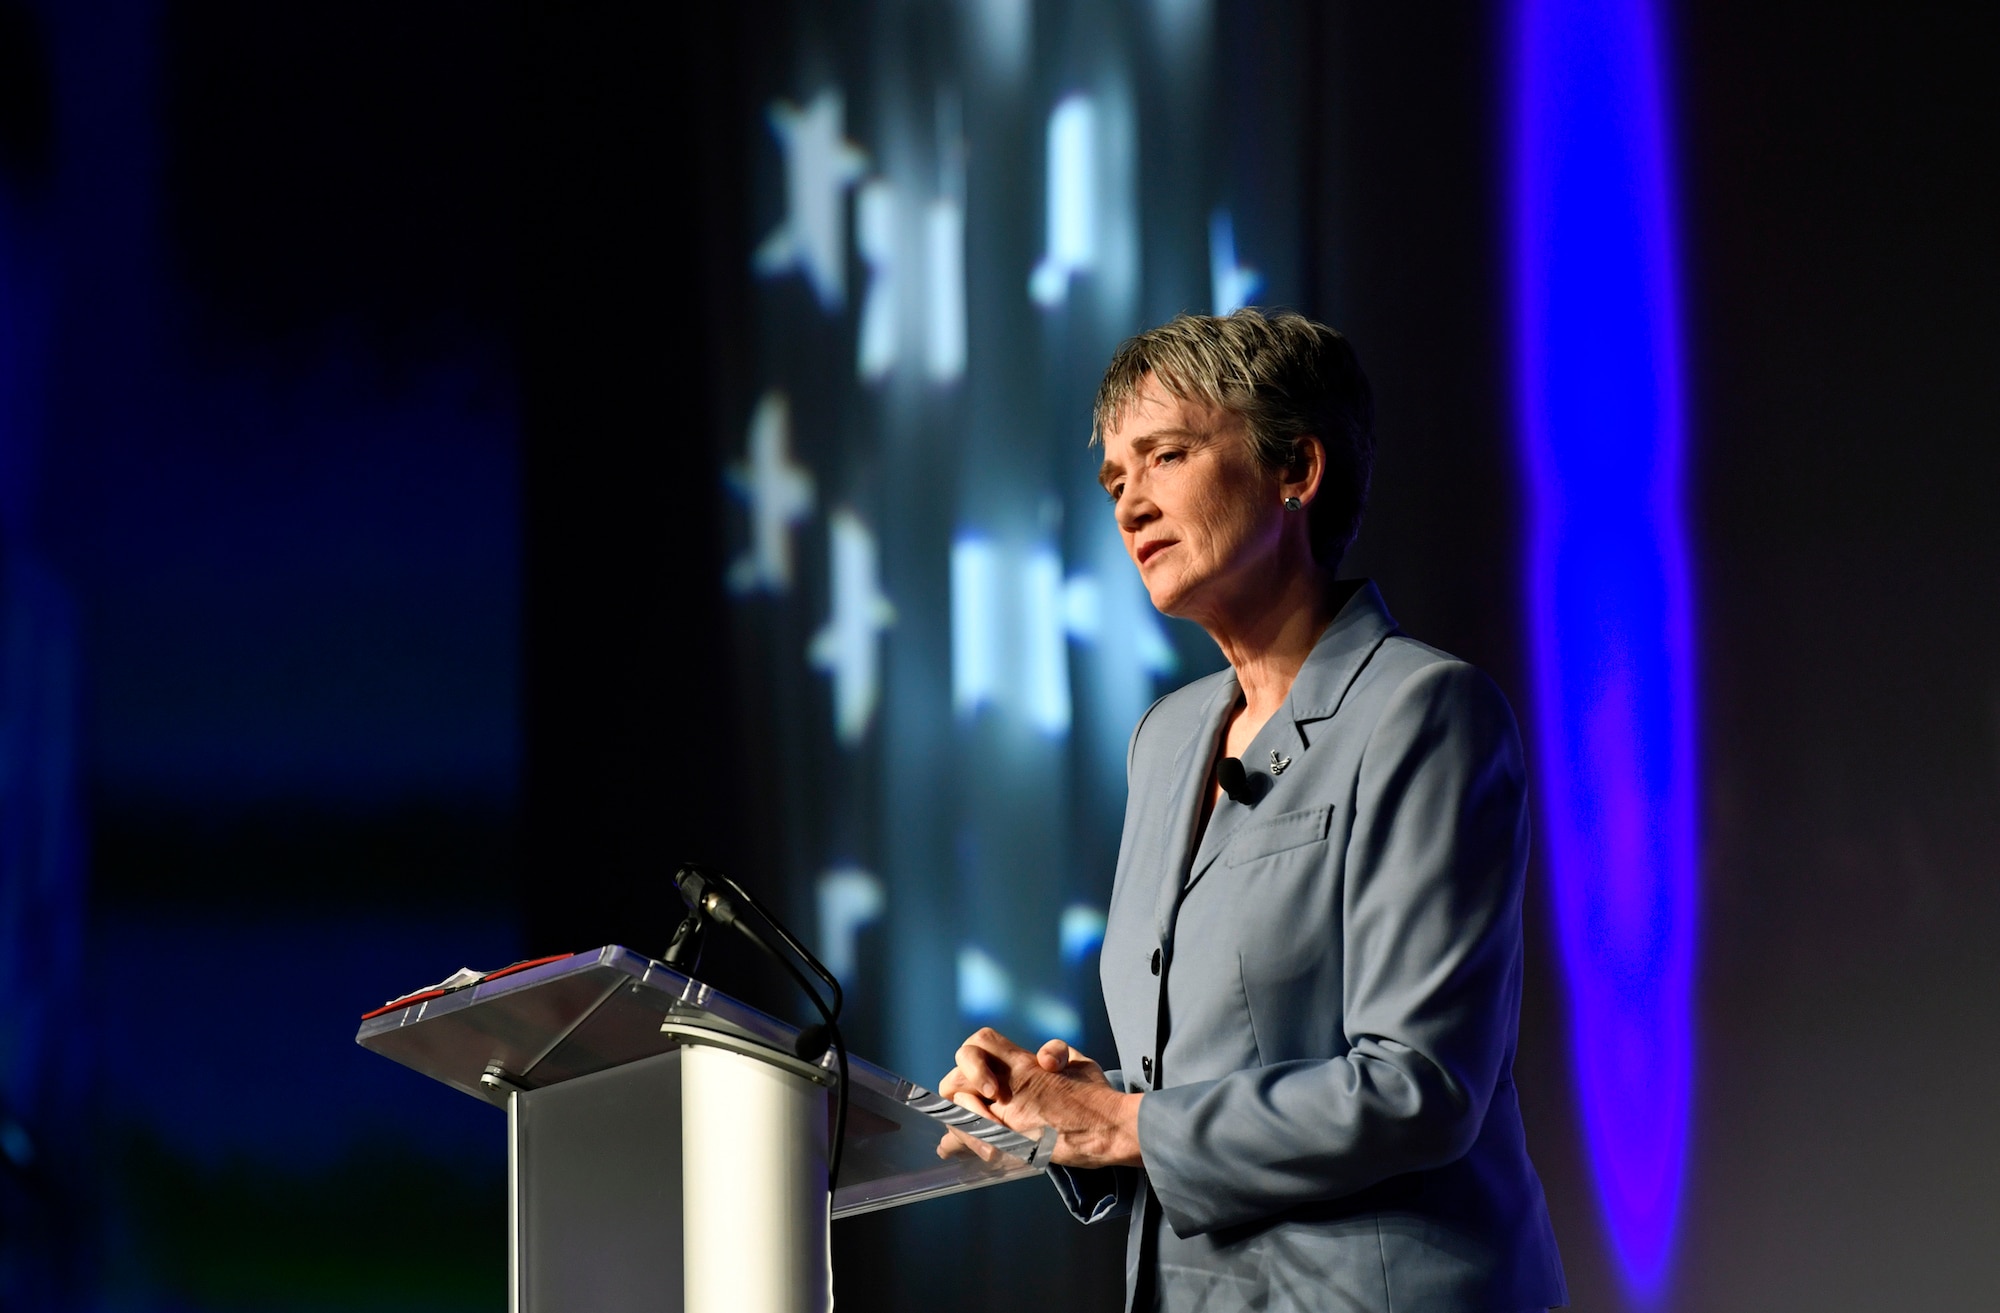 Secretary of the Air Force Heather Wilson speaks about innovation during the Air Force Association Air Warfare Symposium, Orlando, Fla., Feb. 22, 2018.  (U.S. Air Force photo by Wayne A. Clark)